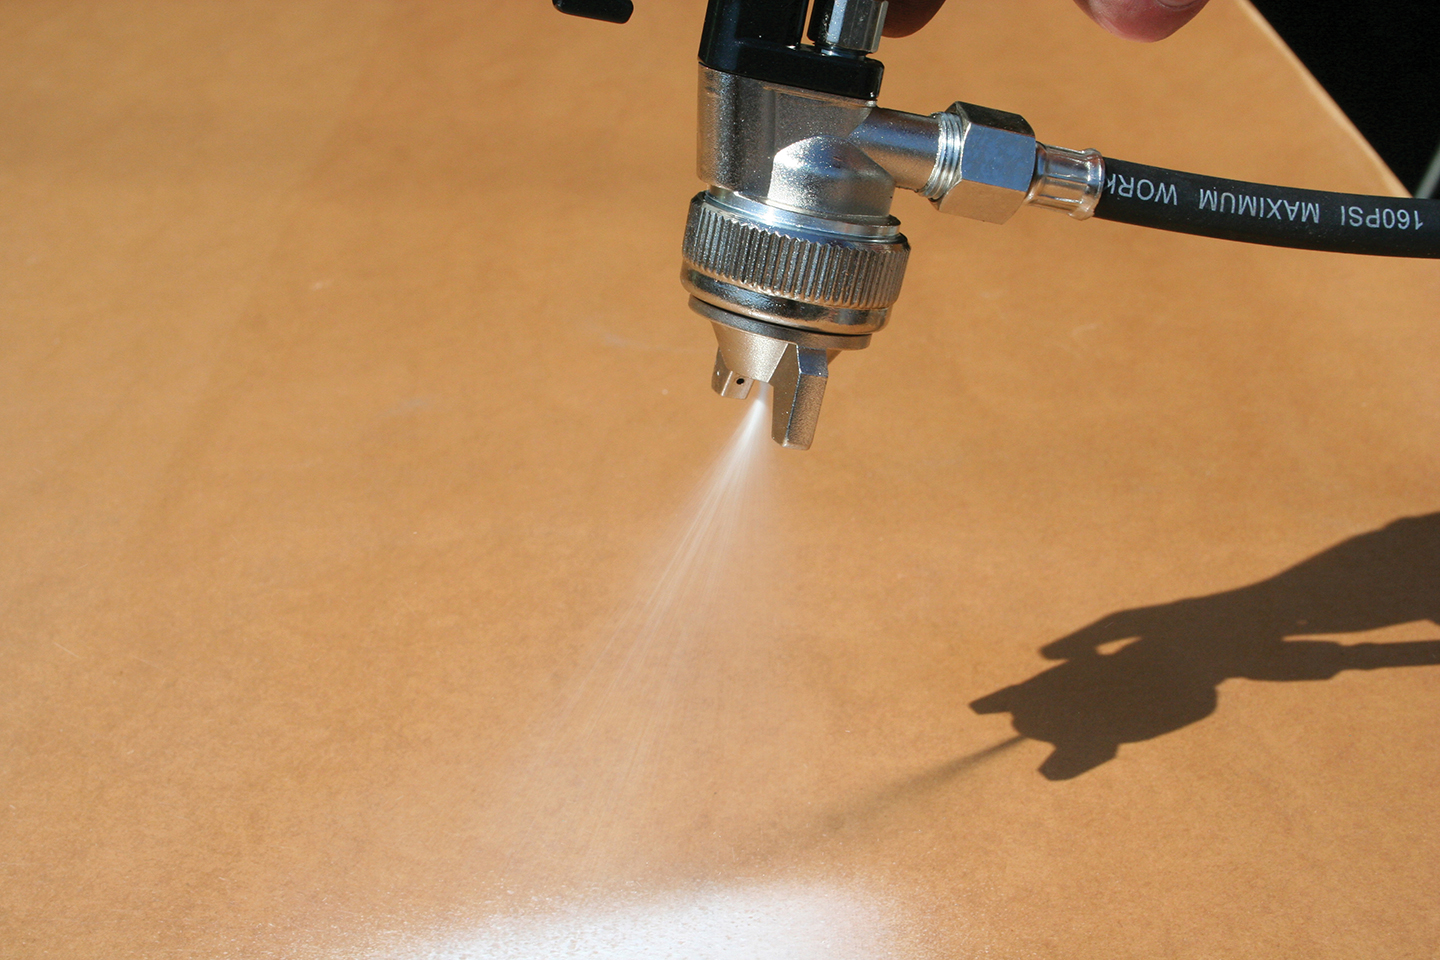 Willamette Valley Company Will-Spray 500 Adhesive